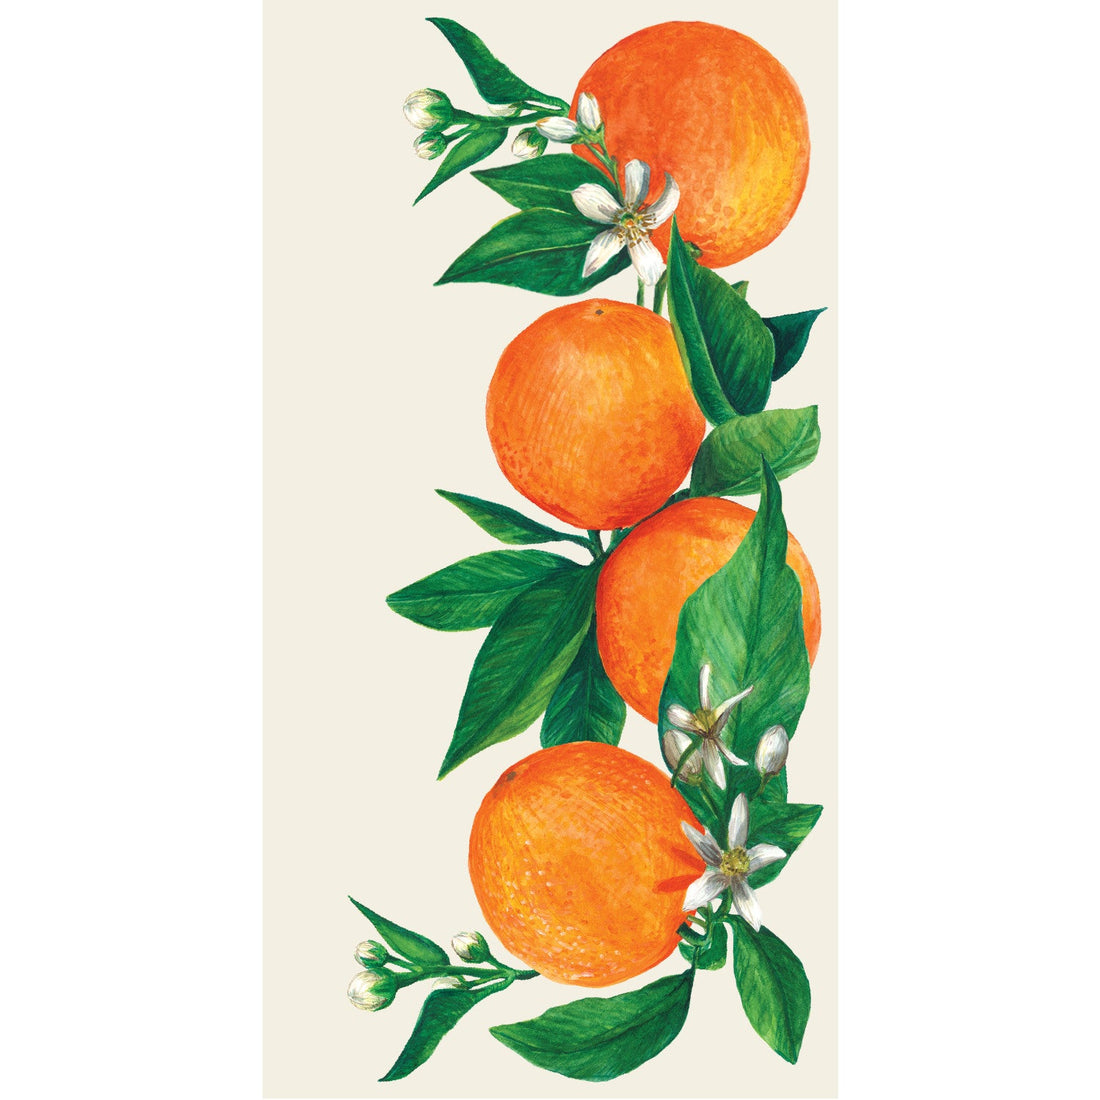 A rectangle guest napkin featuring vibrant illustrated oranges with green leaves and white blossoms on a white background.